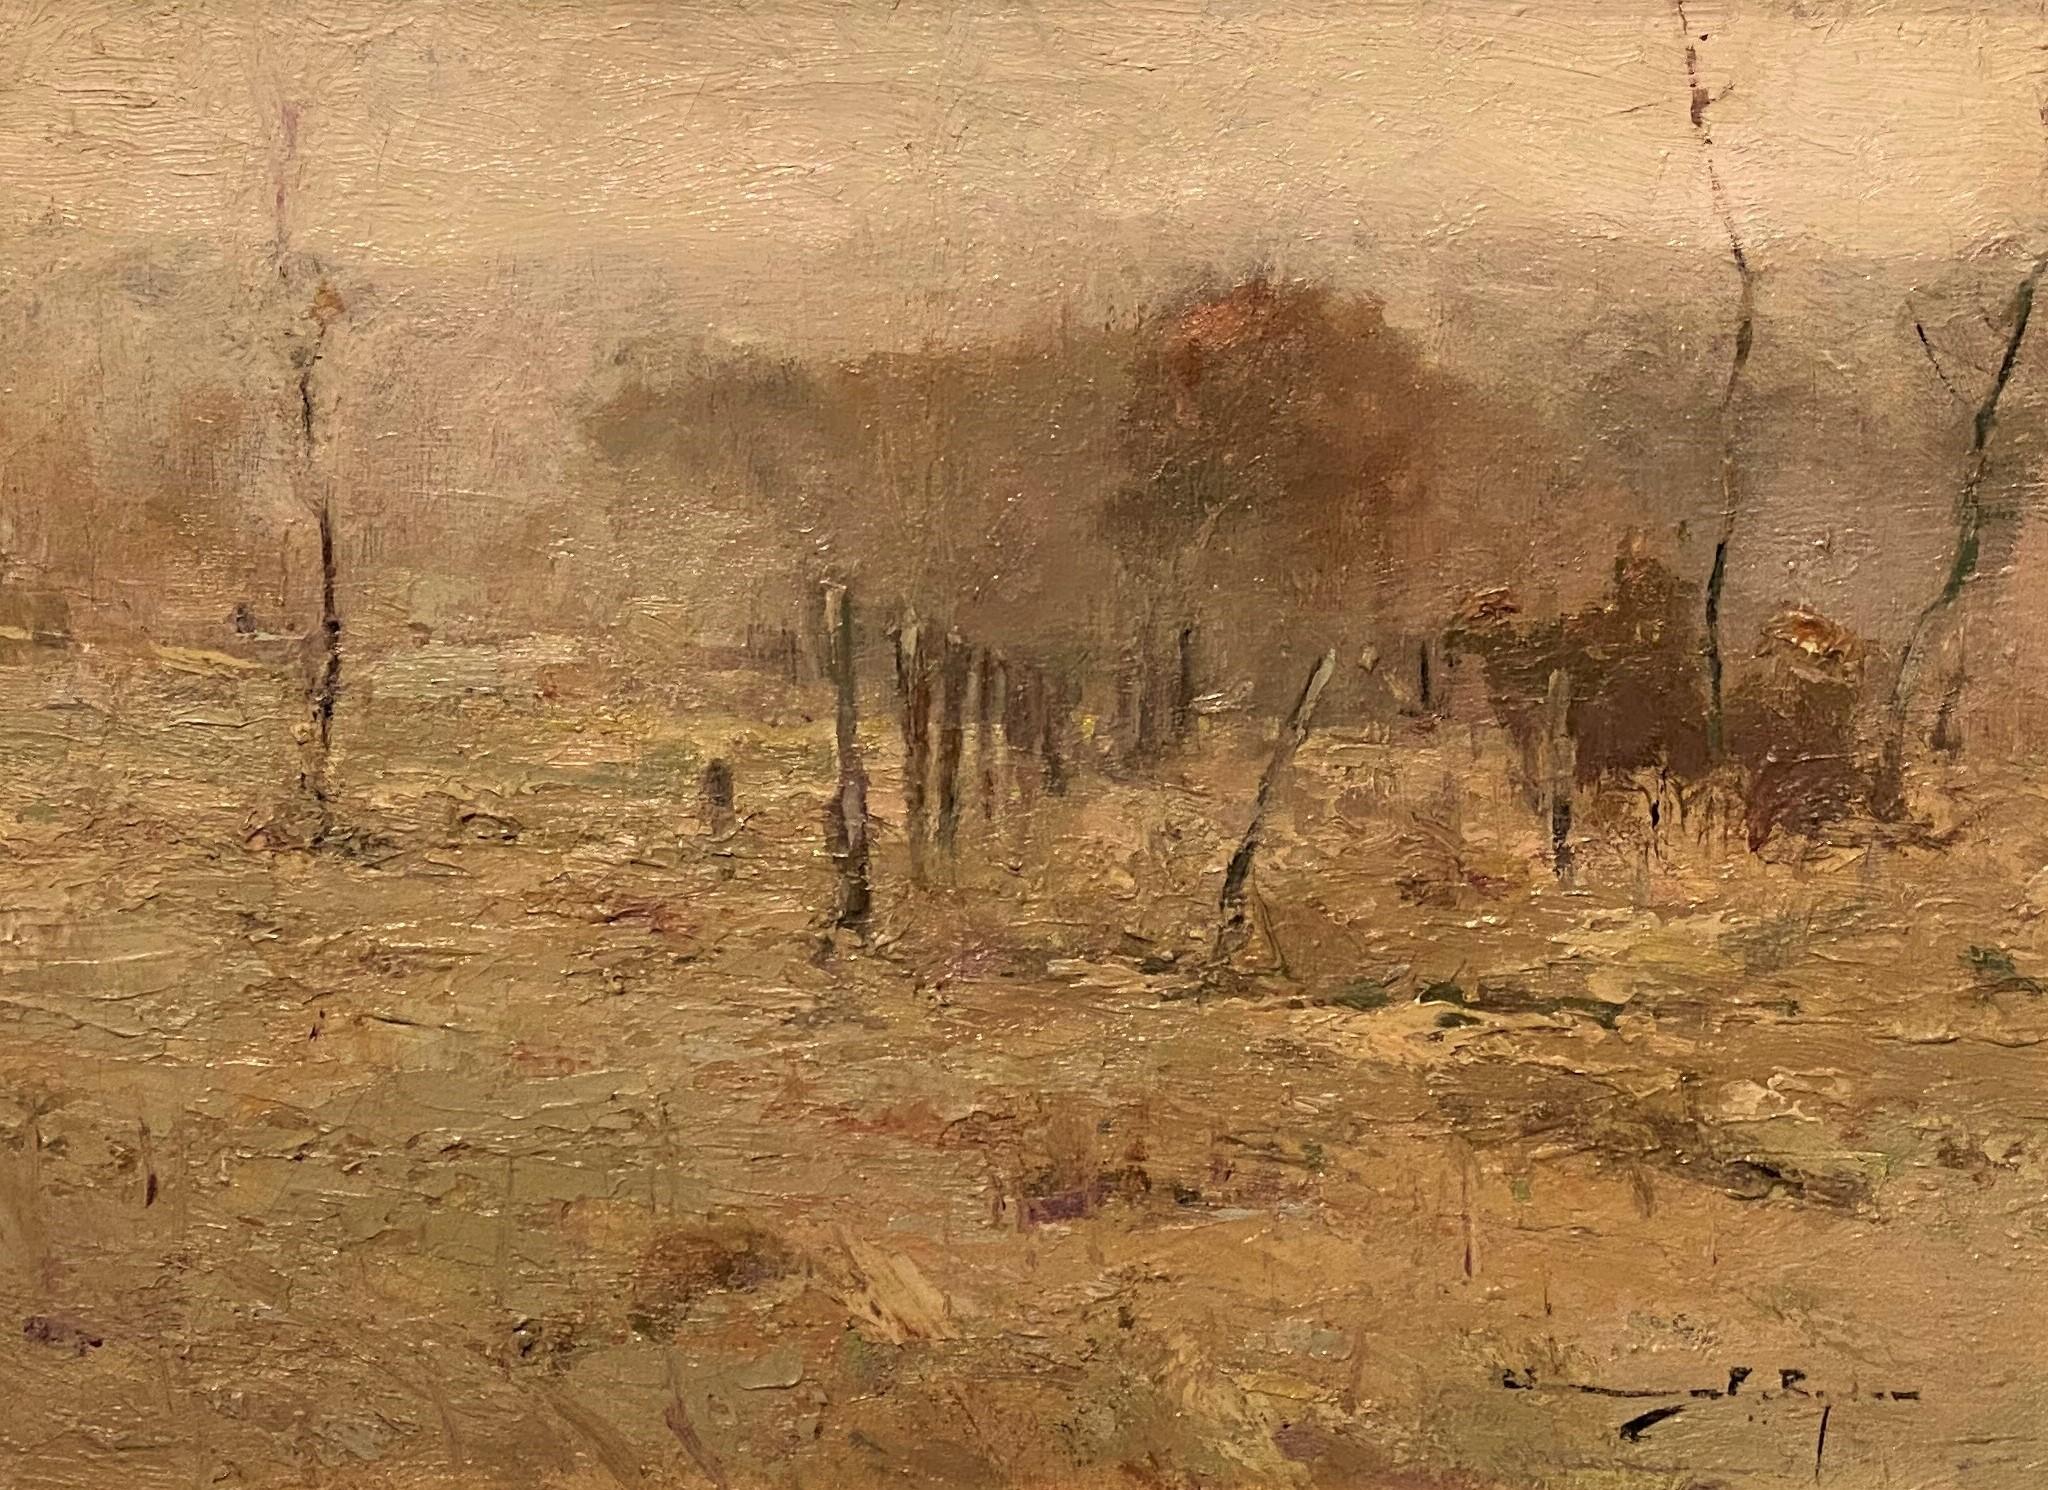 Landscape with Trees - Painting by Chauncey Foster Ryder